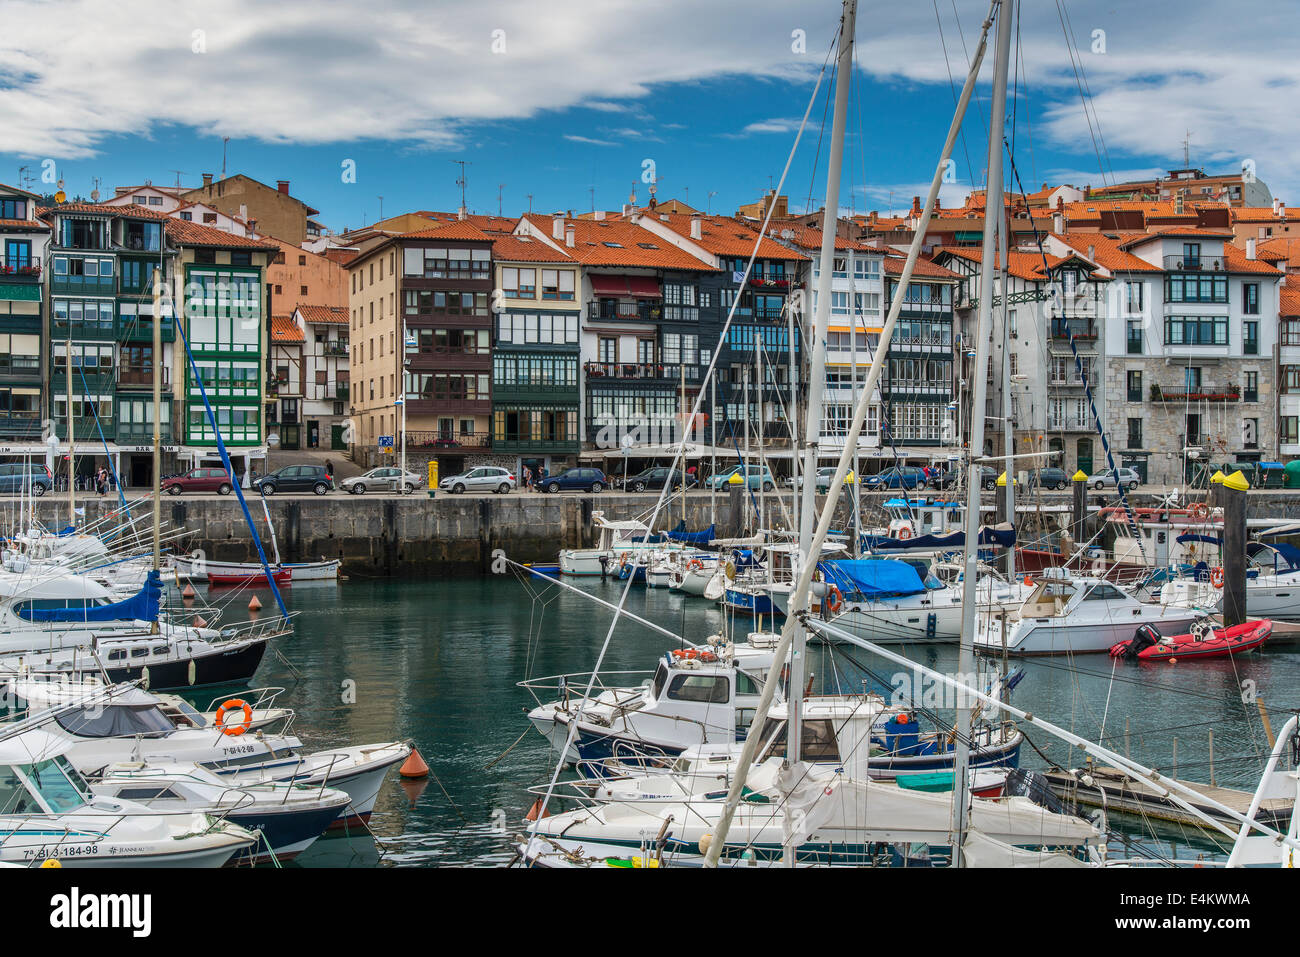 The sea town of Lekeitio, Biscay, Basque Country, Spain Stock Photo